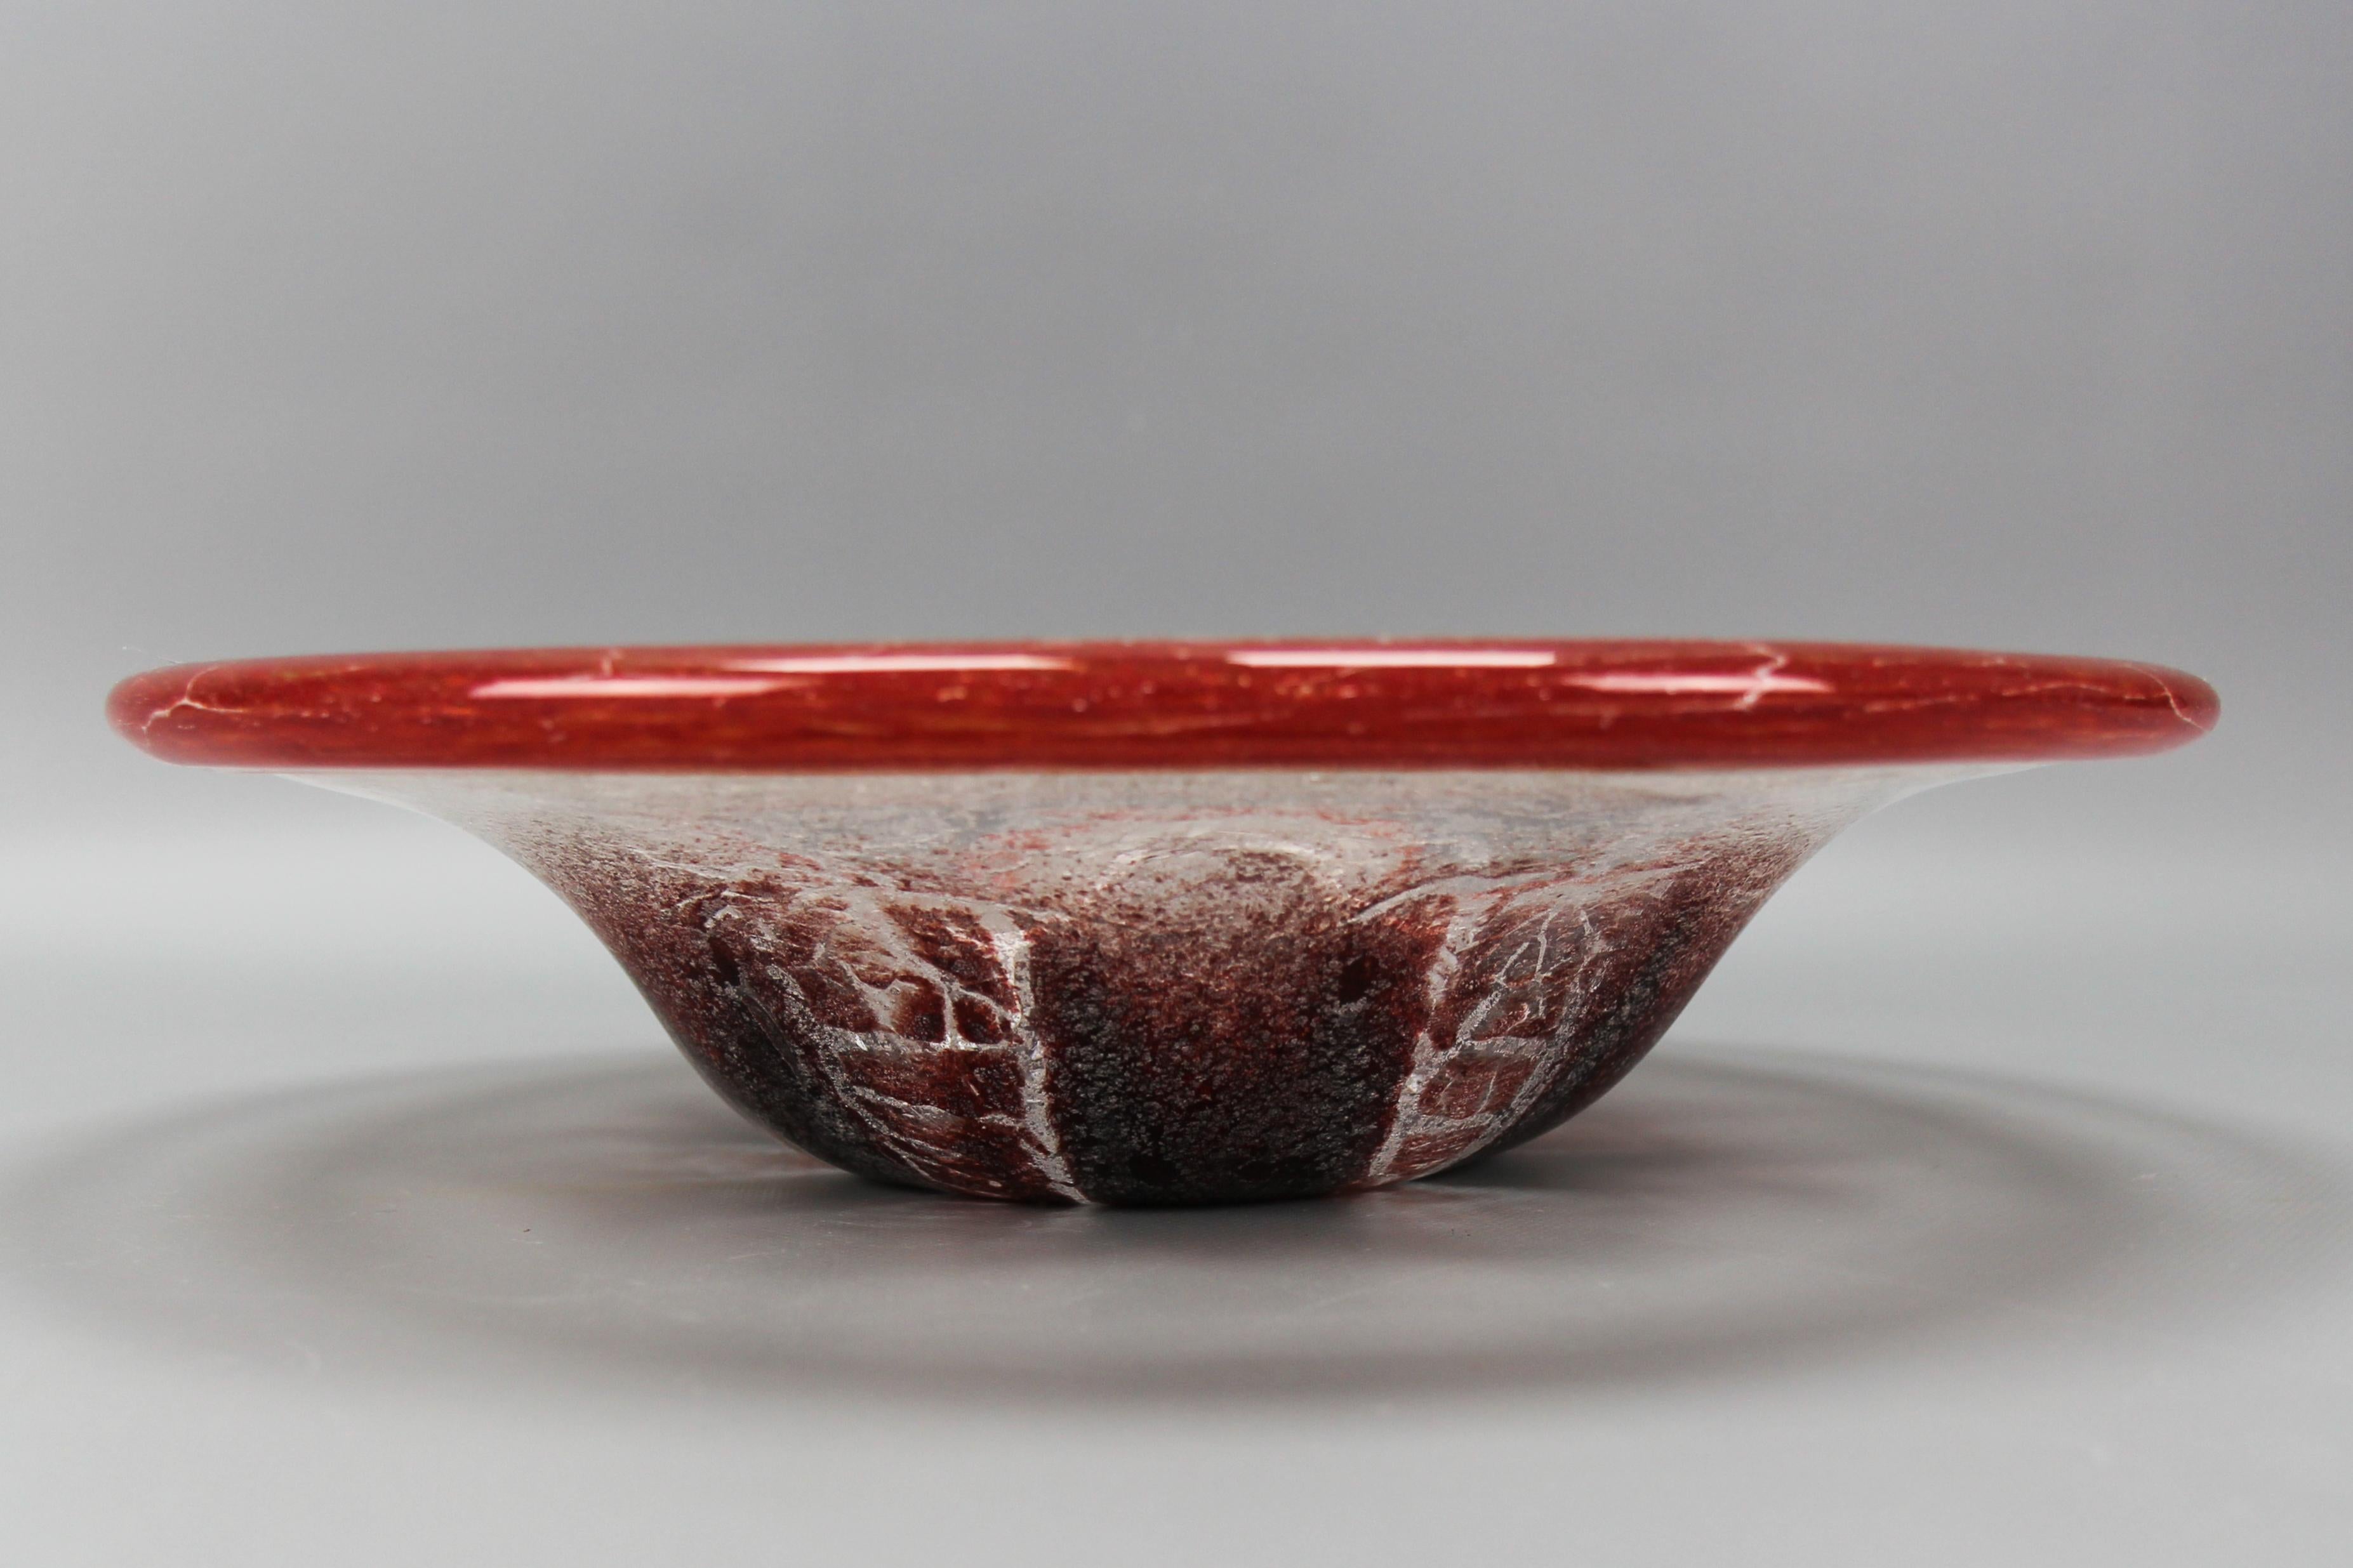 German Ikora Art Glass Bowl in Red, White and Burgundy by WMF, ca. 1930s For Sale 5